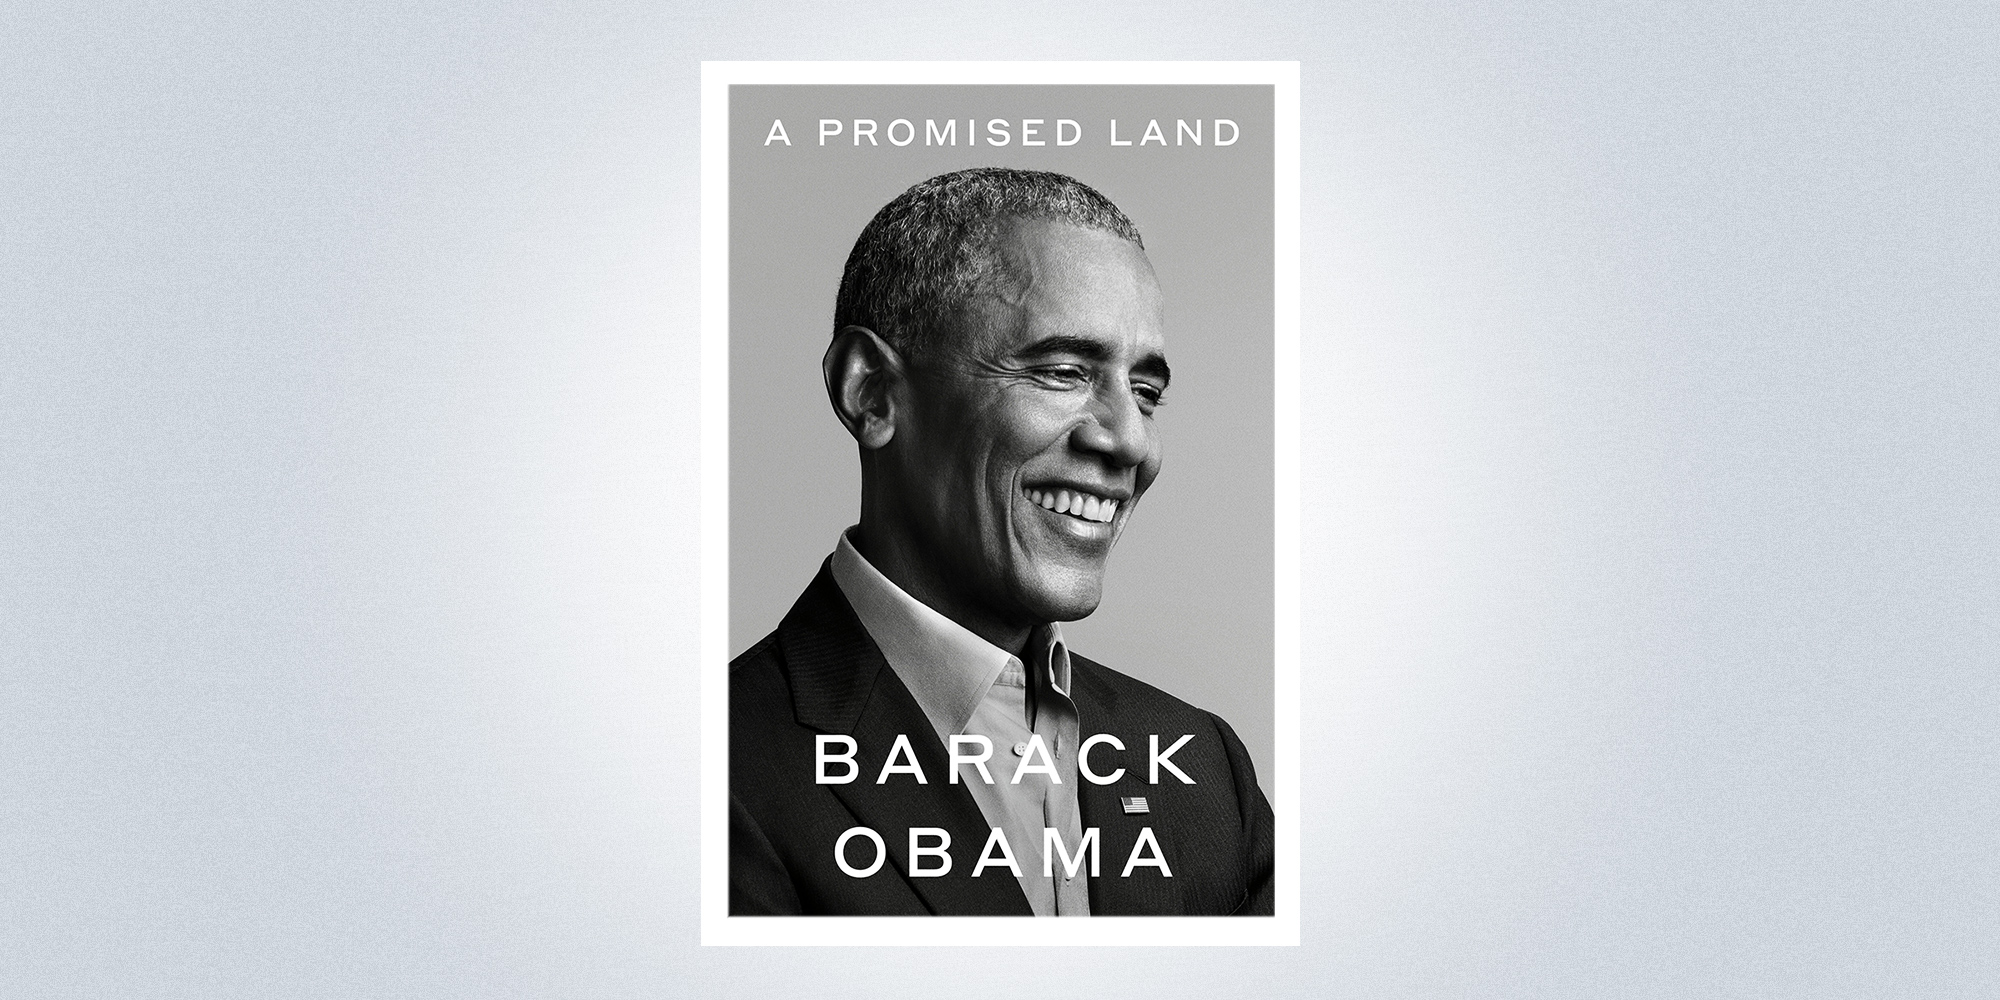 10 Takeaways From Barack Obama's New Memoir 'A Promised Land'